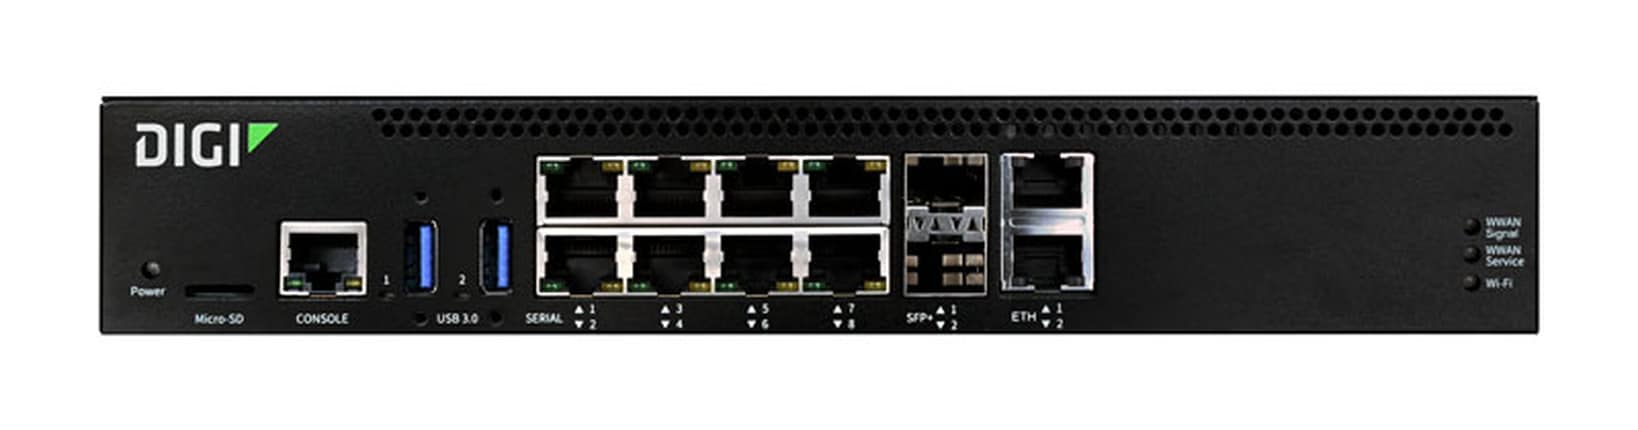 Digi Connect EZ 8-Port Serial Server with RS-232,CMG4,Cellular Antennas and